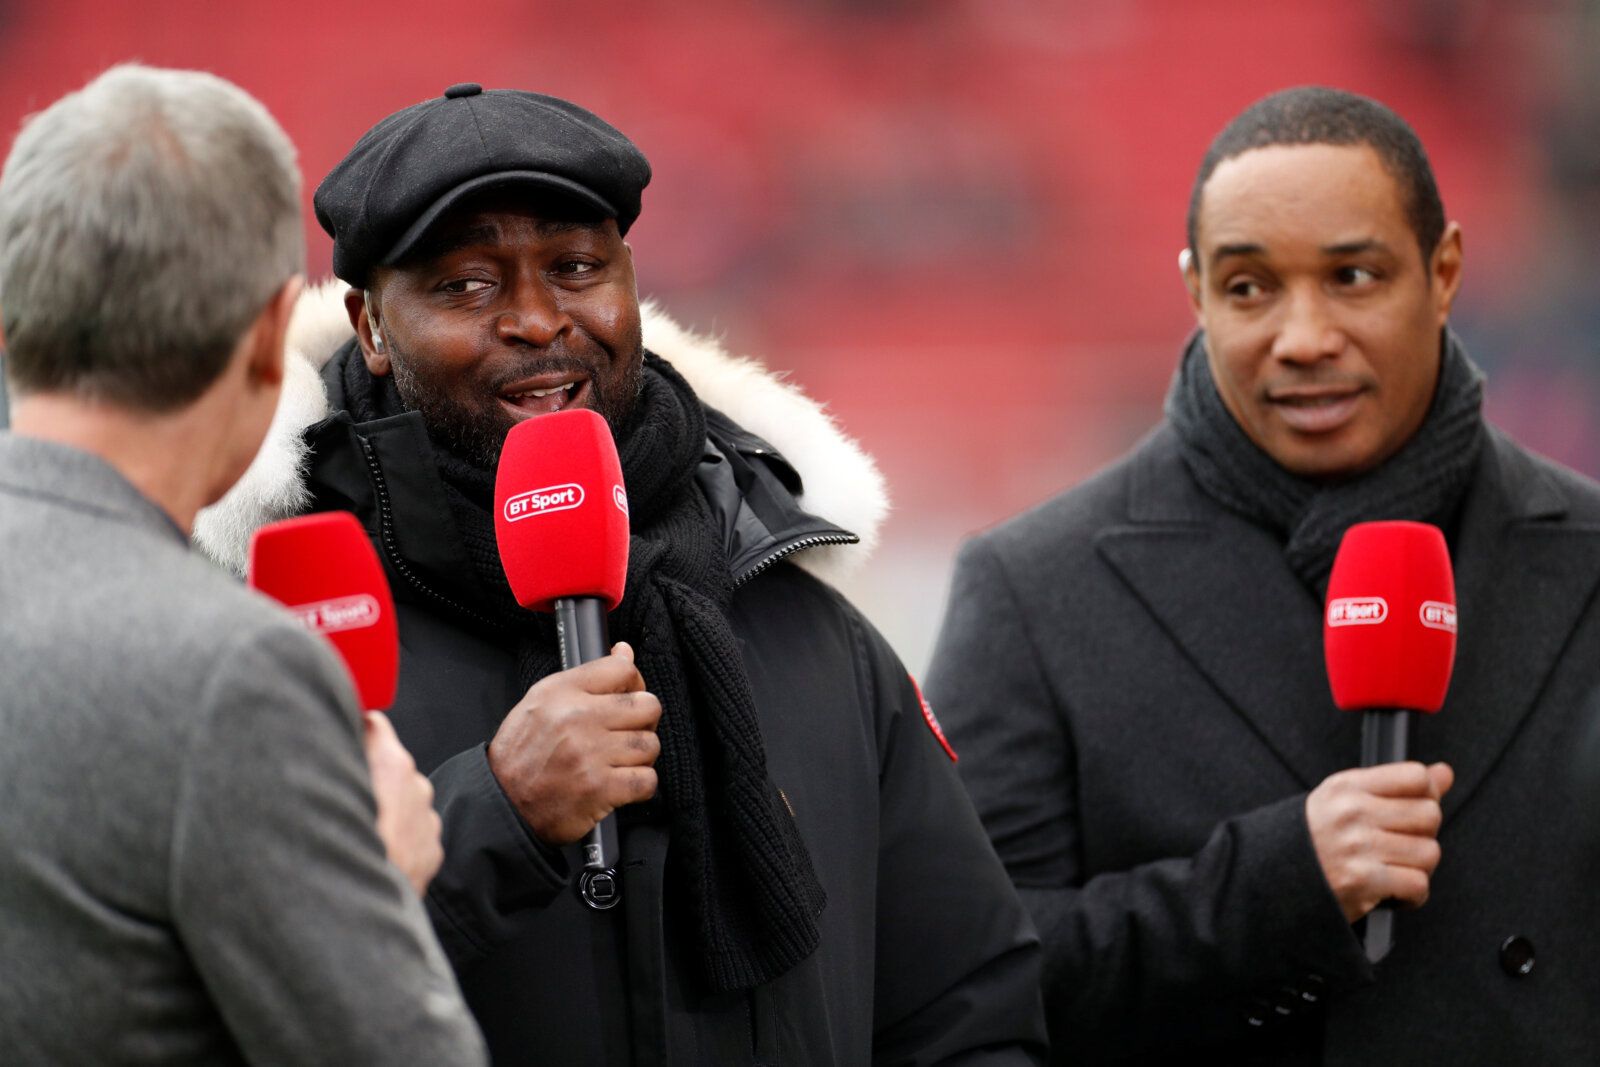 Soccer Football - FA Cup Fifth Round - Bristol City v Wolverhampton Wanderers - Ashton Gate Stadium, Bristol, Britain - February 17, 2019  Andrew Cole and Paul Ince before the match     Action Images via Reuters/John Sibley